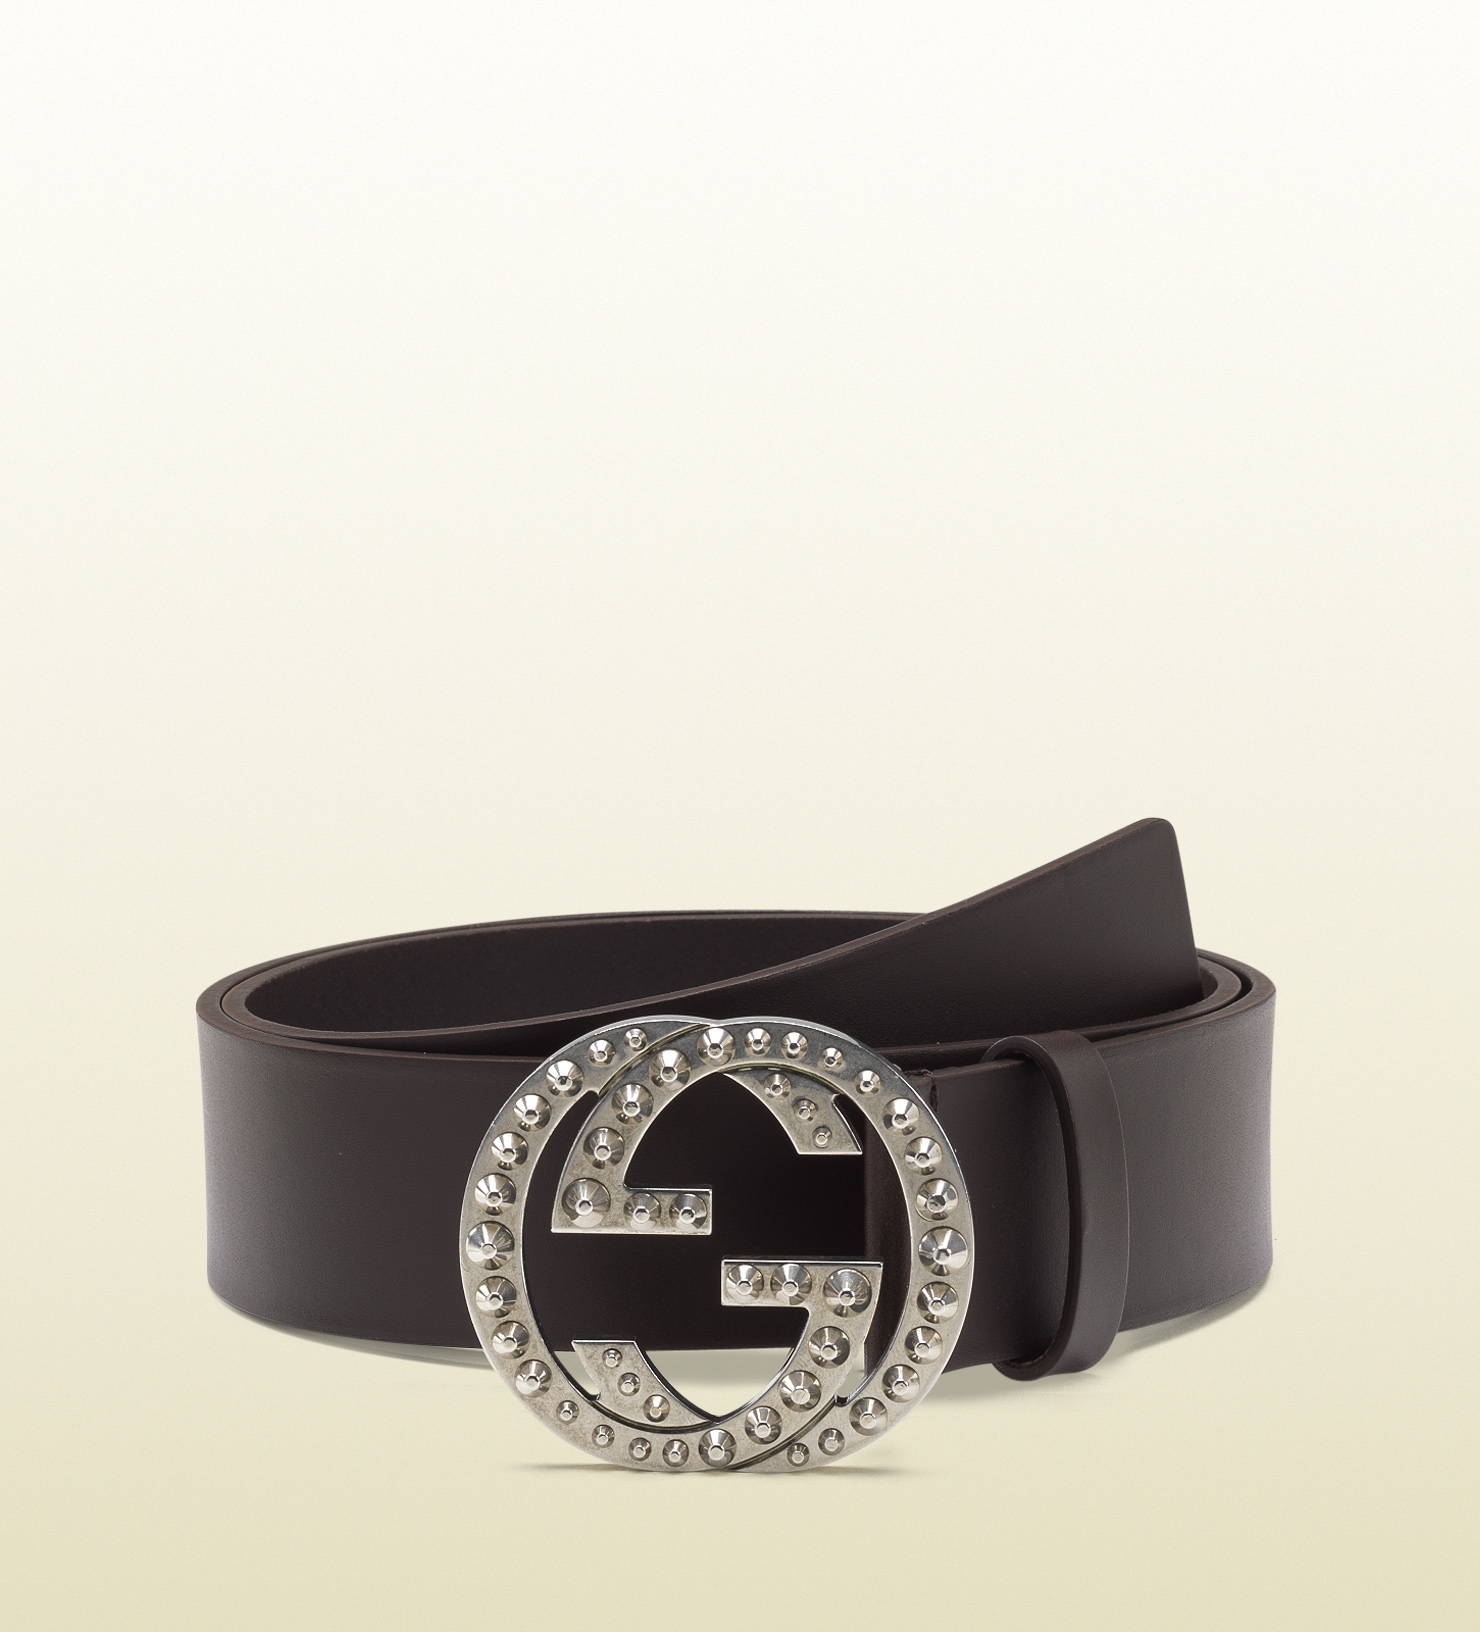 Lyst - Gucci Brown Leather Belt with Studded Interlocking ...